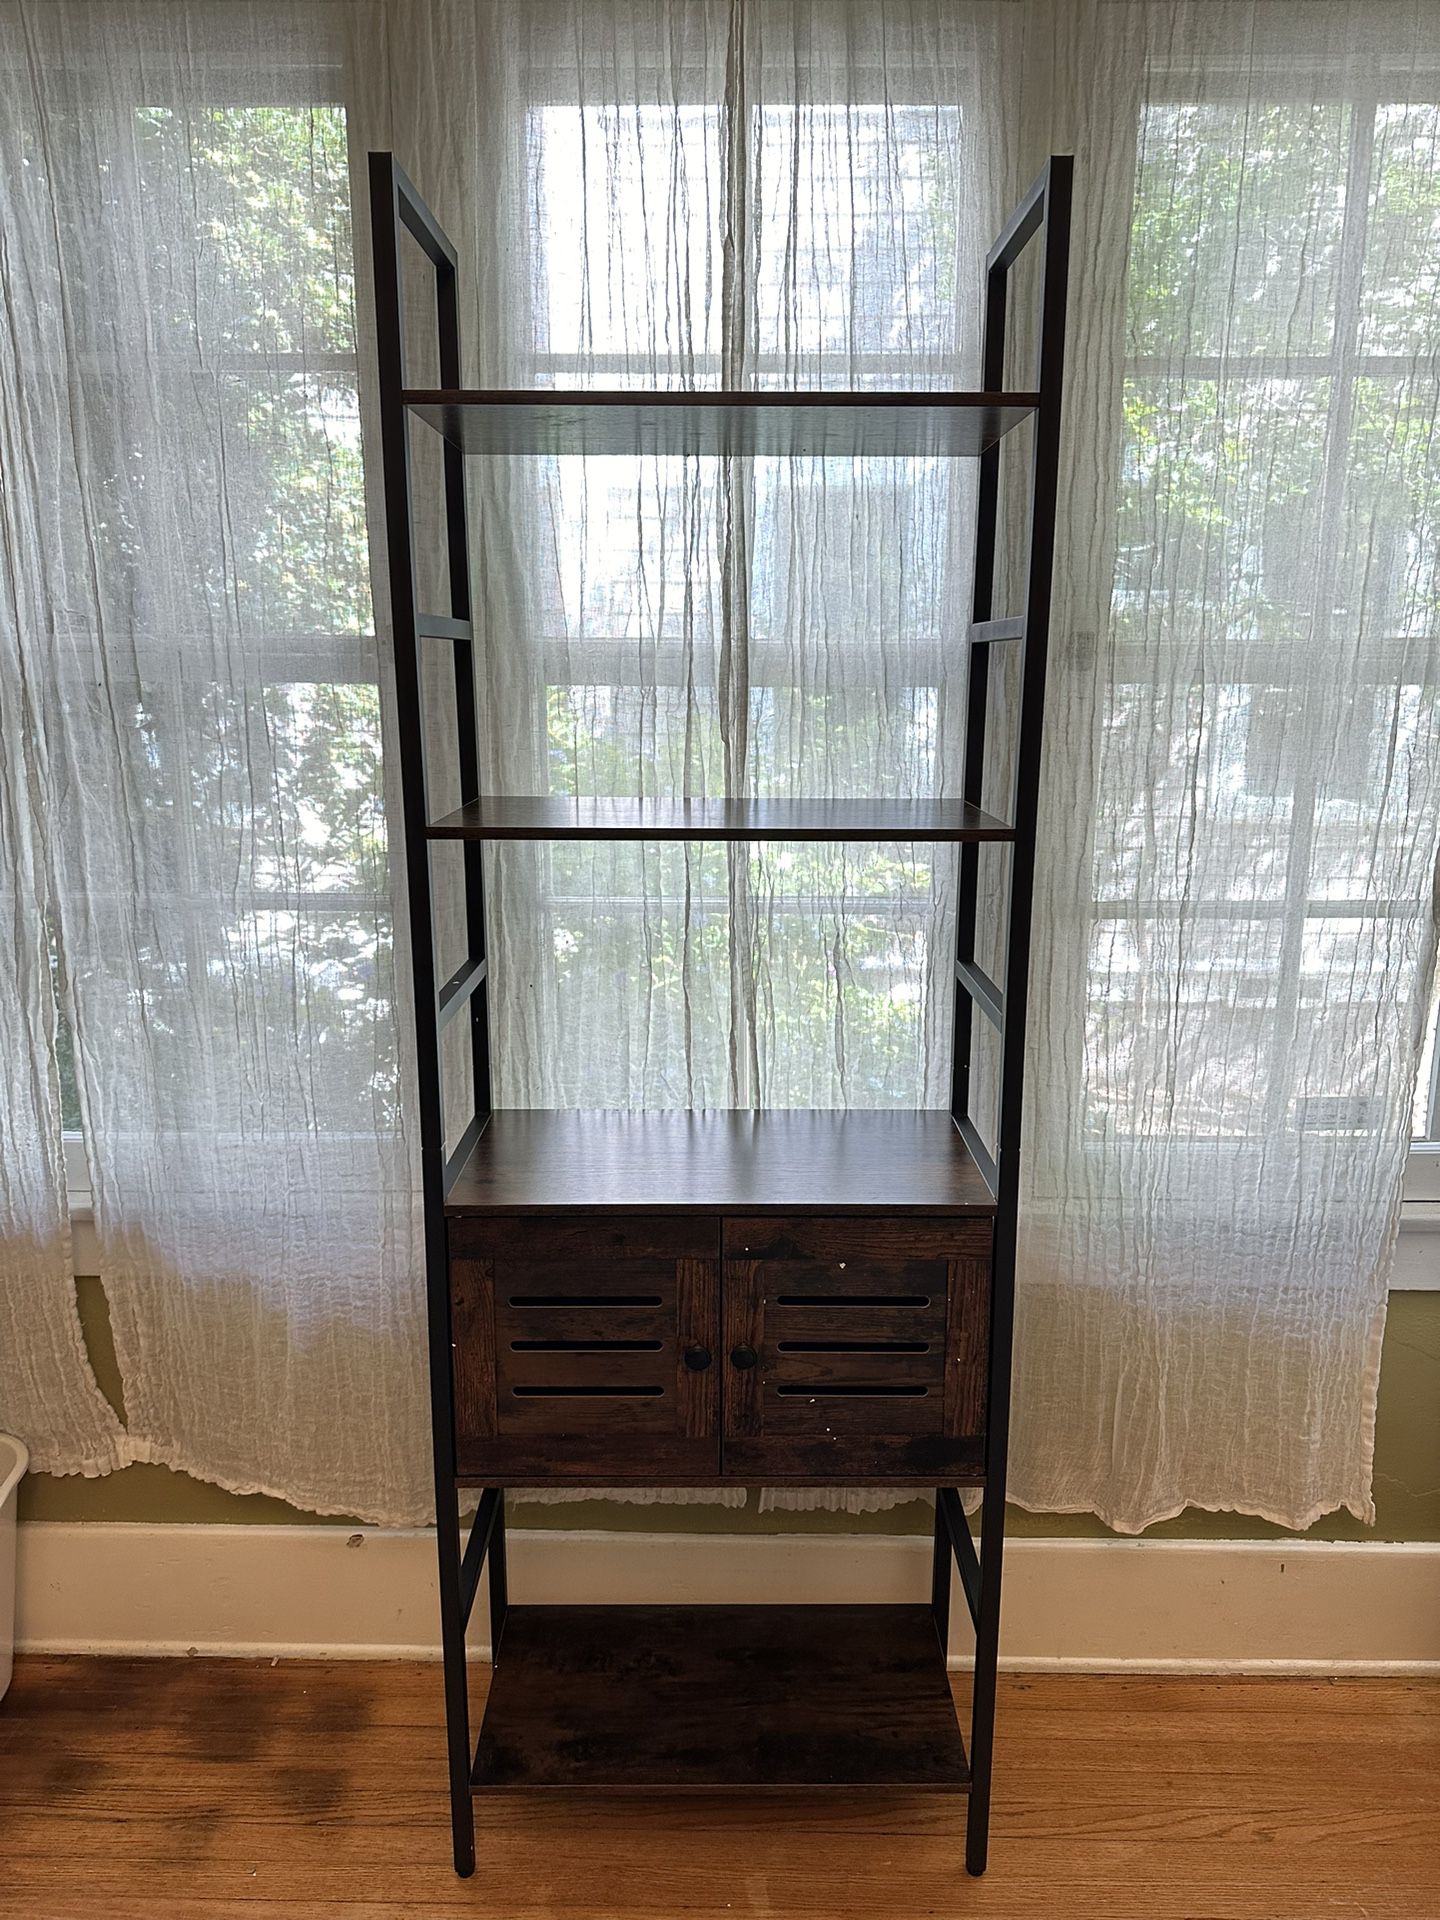 Tall Storage Rack With Cabinet